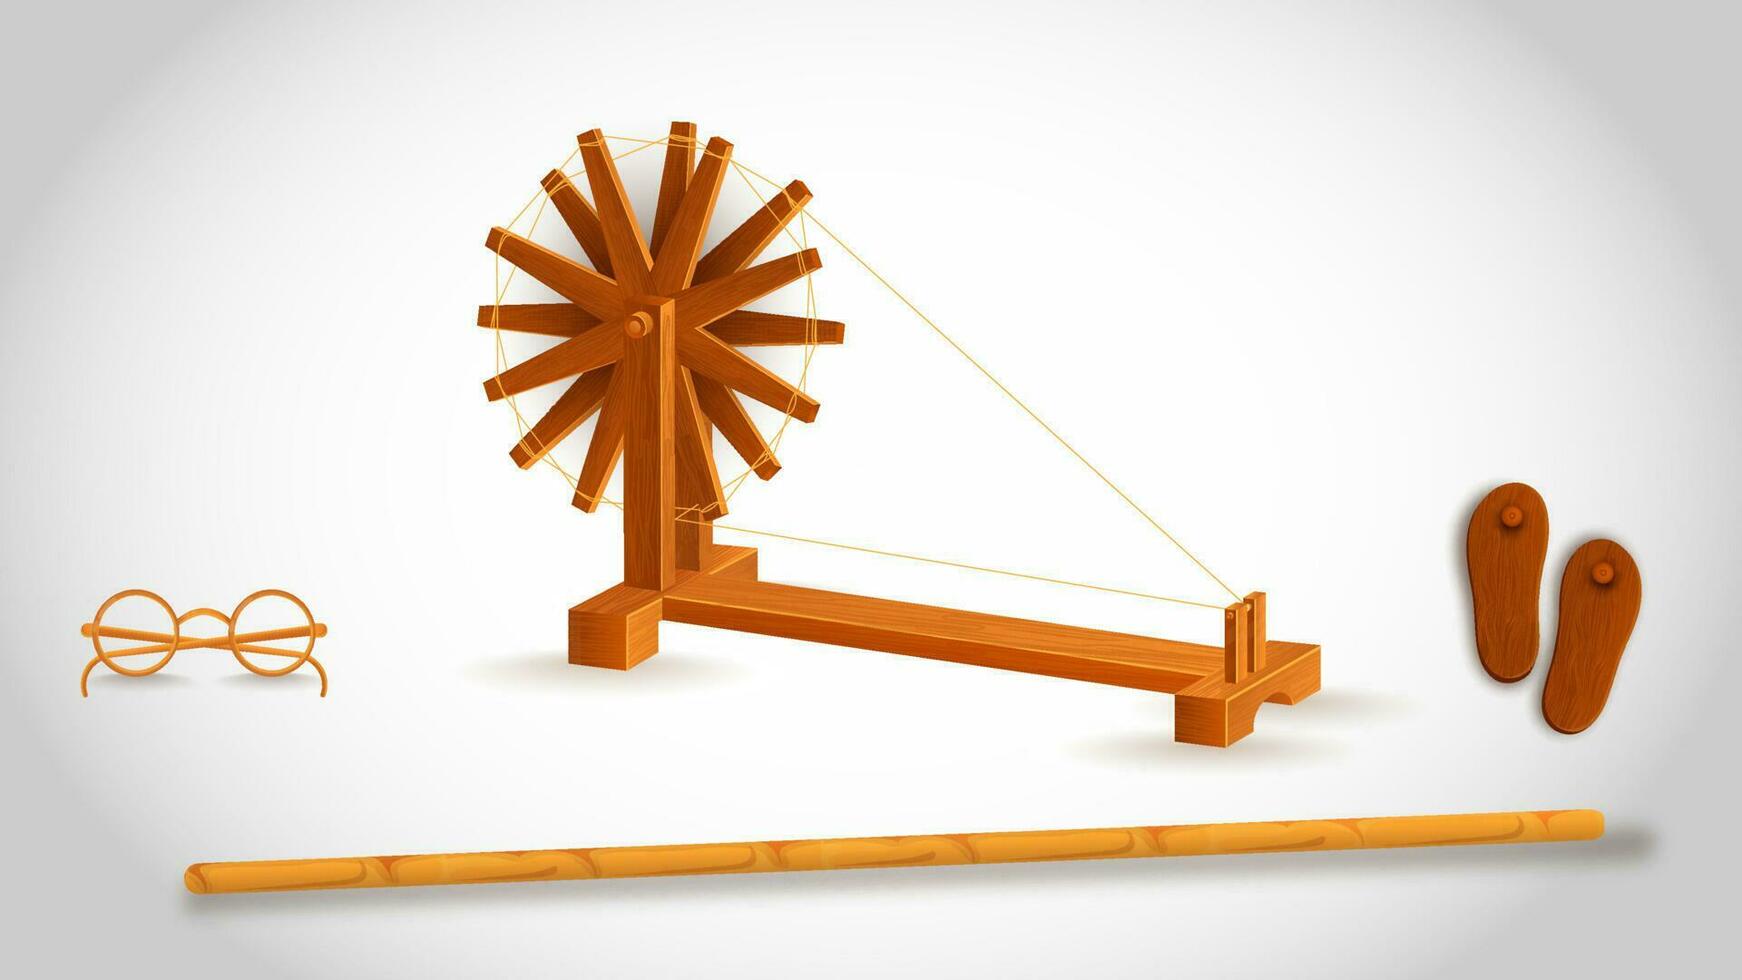 Gandhi's tool like as wooden stick with spinning wheel, eyeglasses. vector